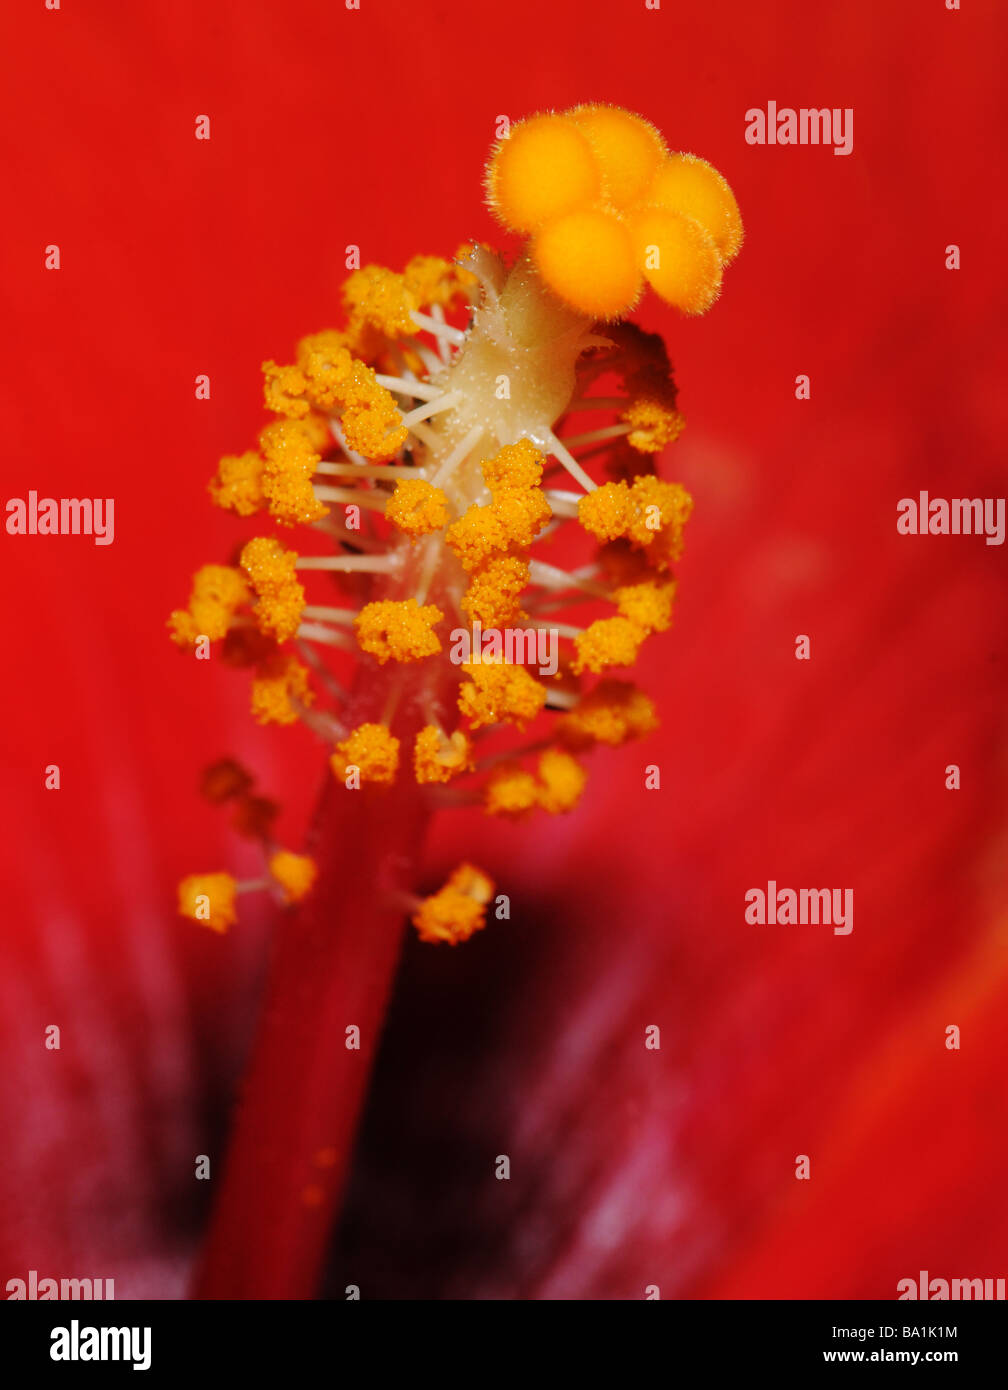 Hibiscus flower, close-up showing pistil and stamens. Stock Photo